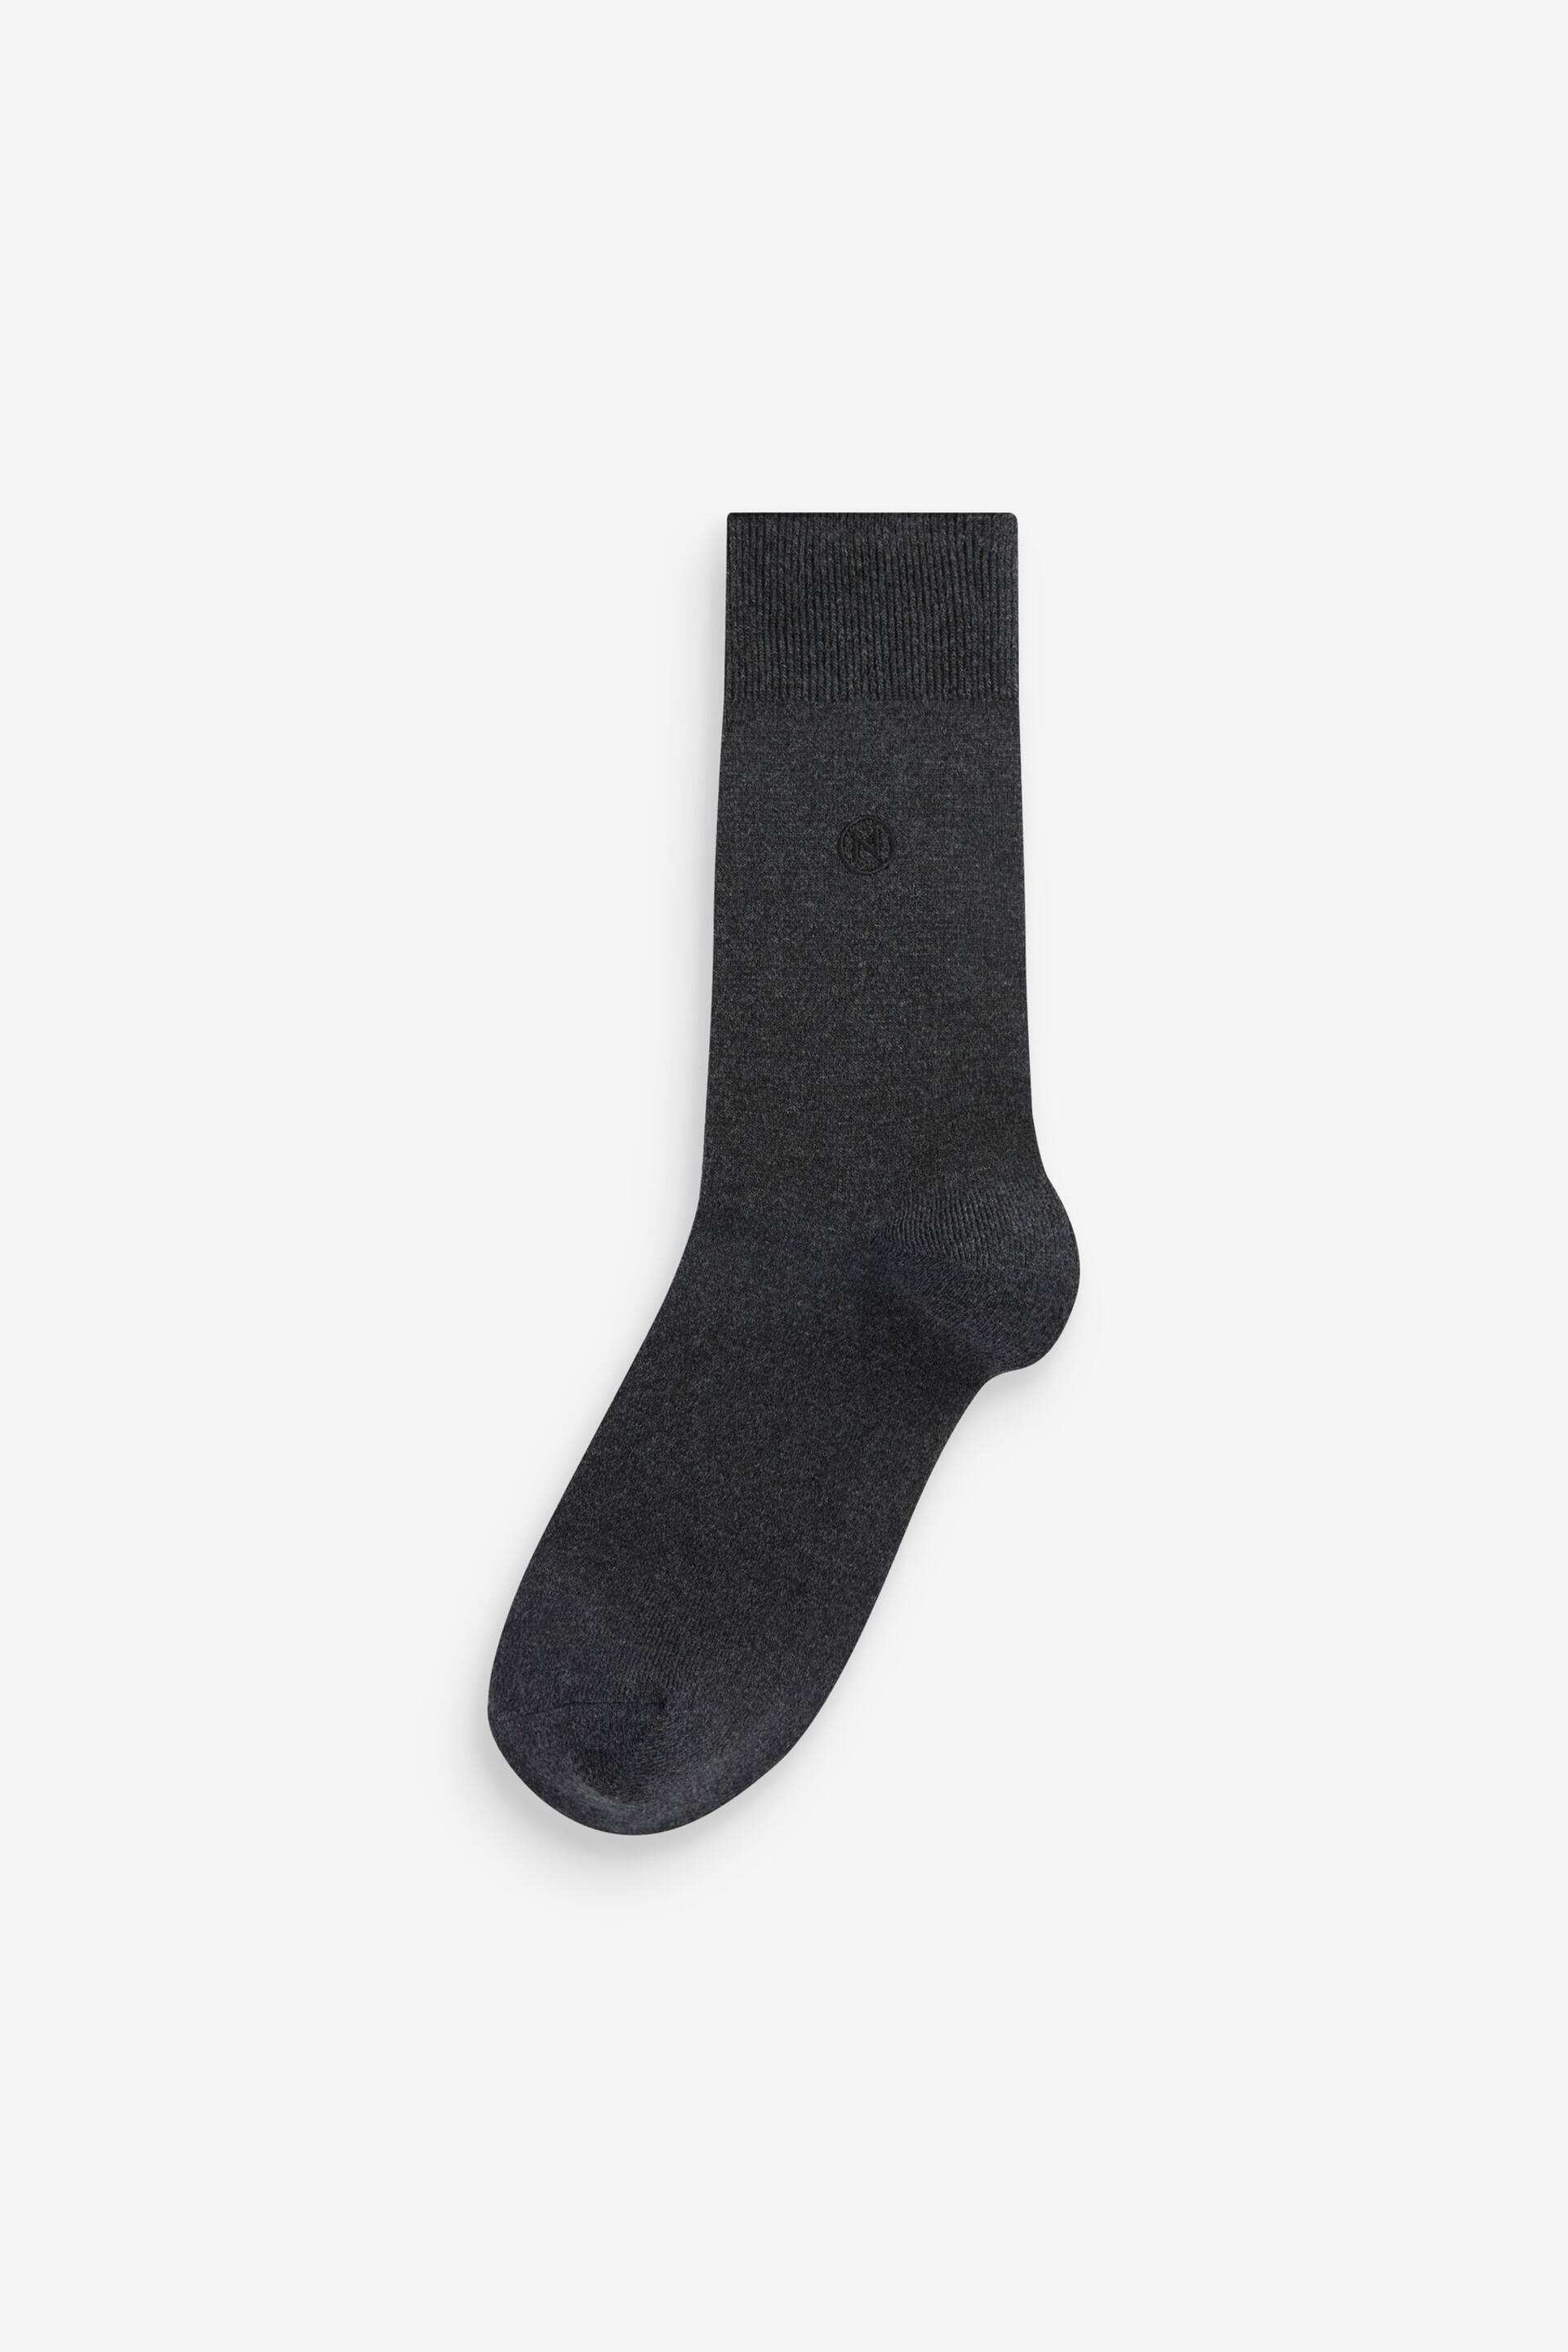 Neutrals 10 Pack Embroidered Lasting Fresh Socks - Image 6 of 14